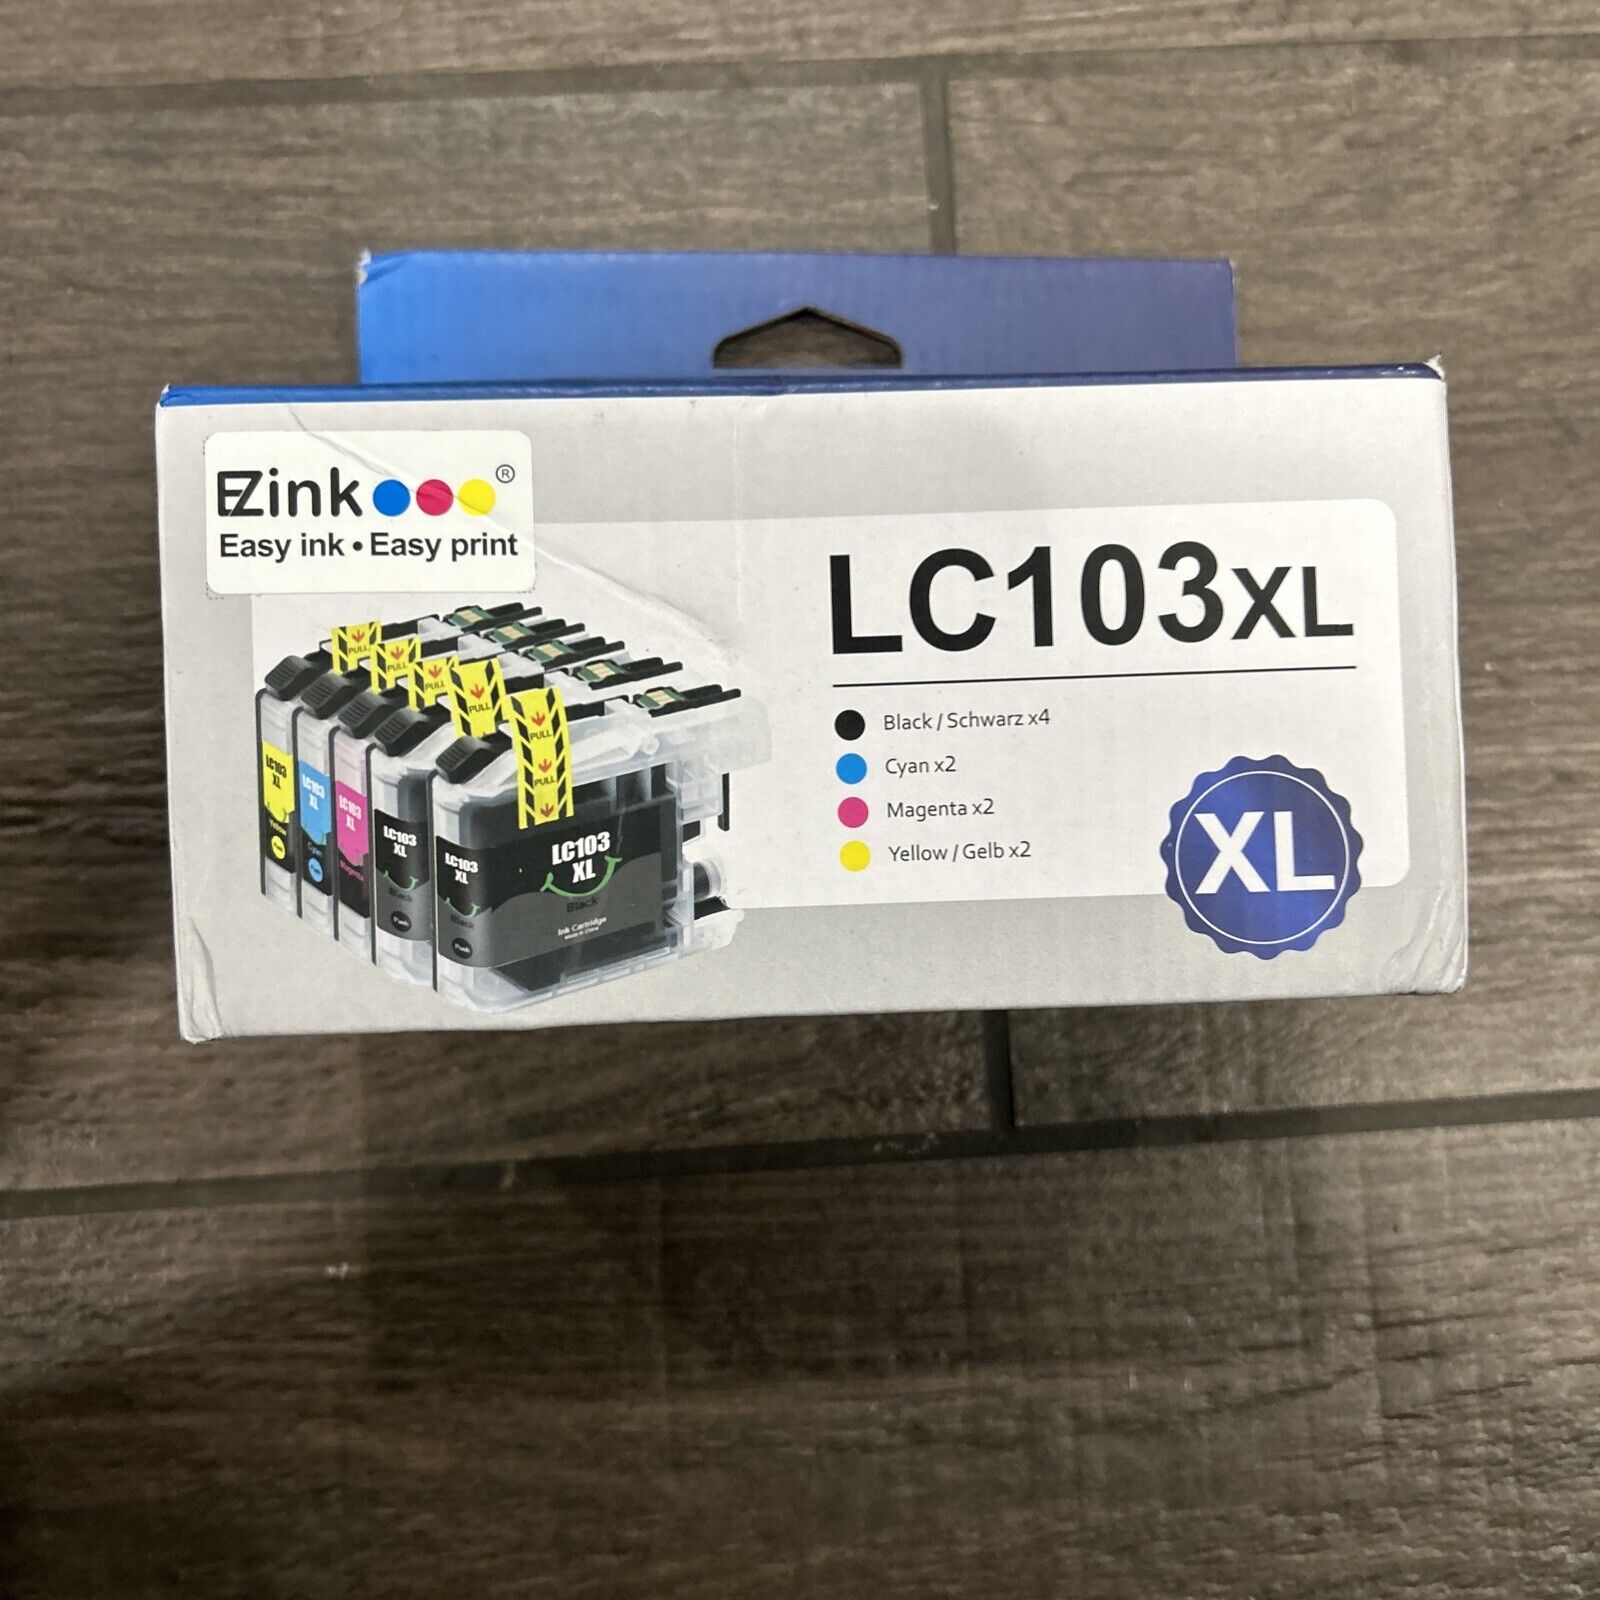 Brother Ezink Ink Printer Cartridges LC103 XL 15 Pack New..partial 12 Pack